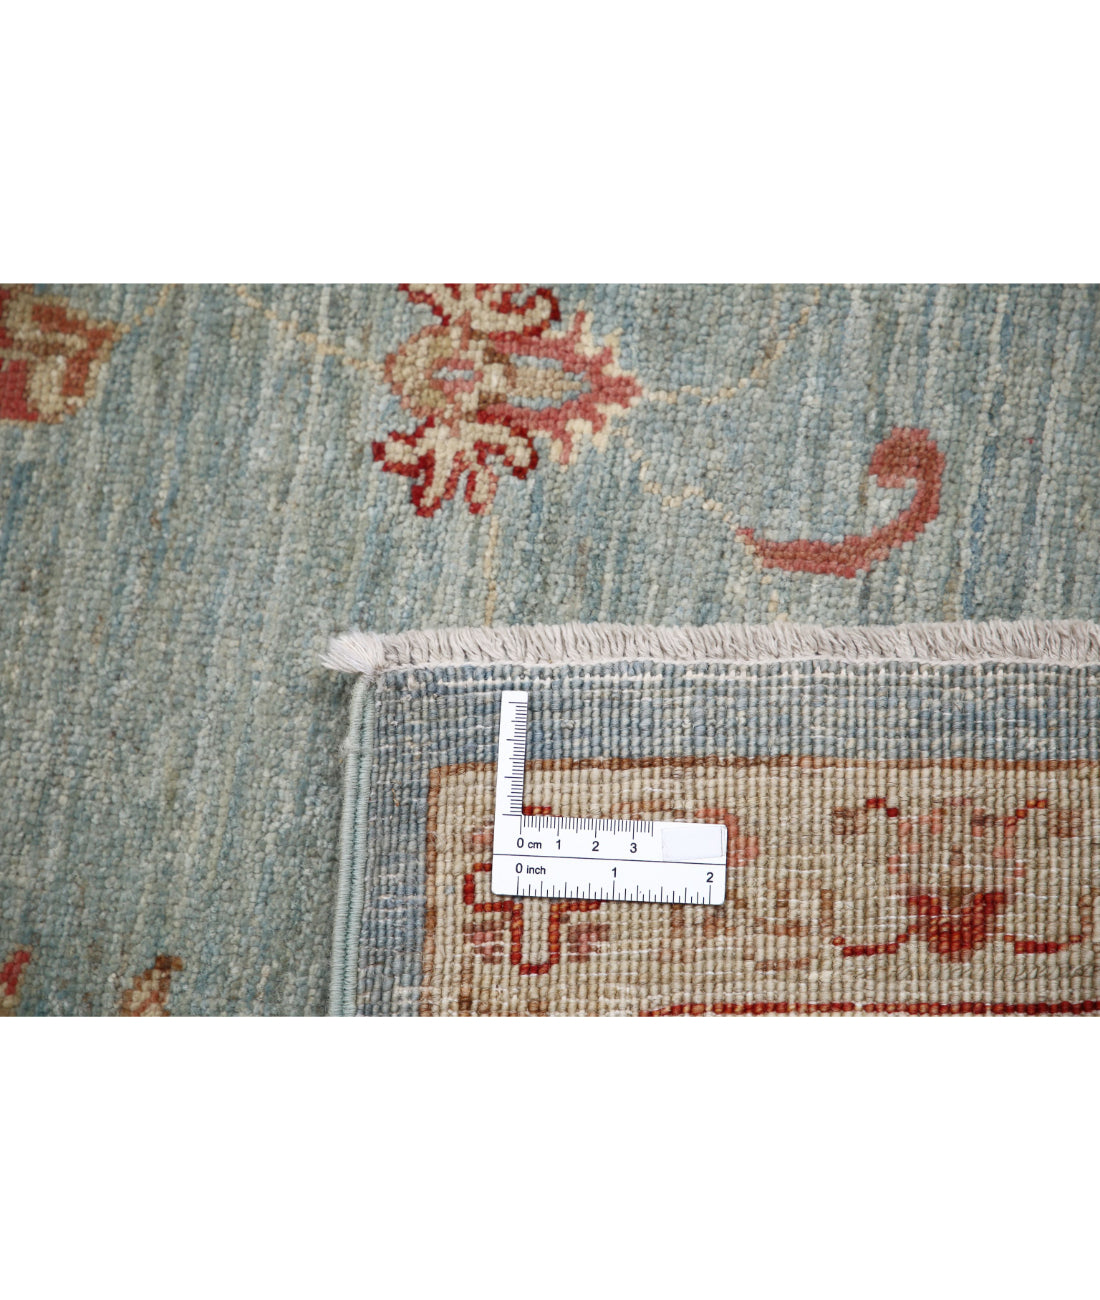 Ziegler 6'9'' X 9'8'' Hand-Knotted Wool Rug 6'9'' x 9'8'' (203 X 290) / Blue / Ivory